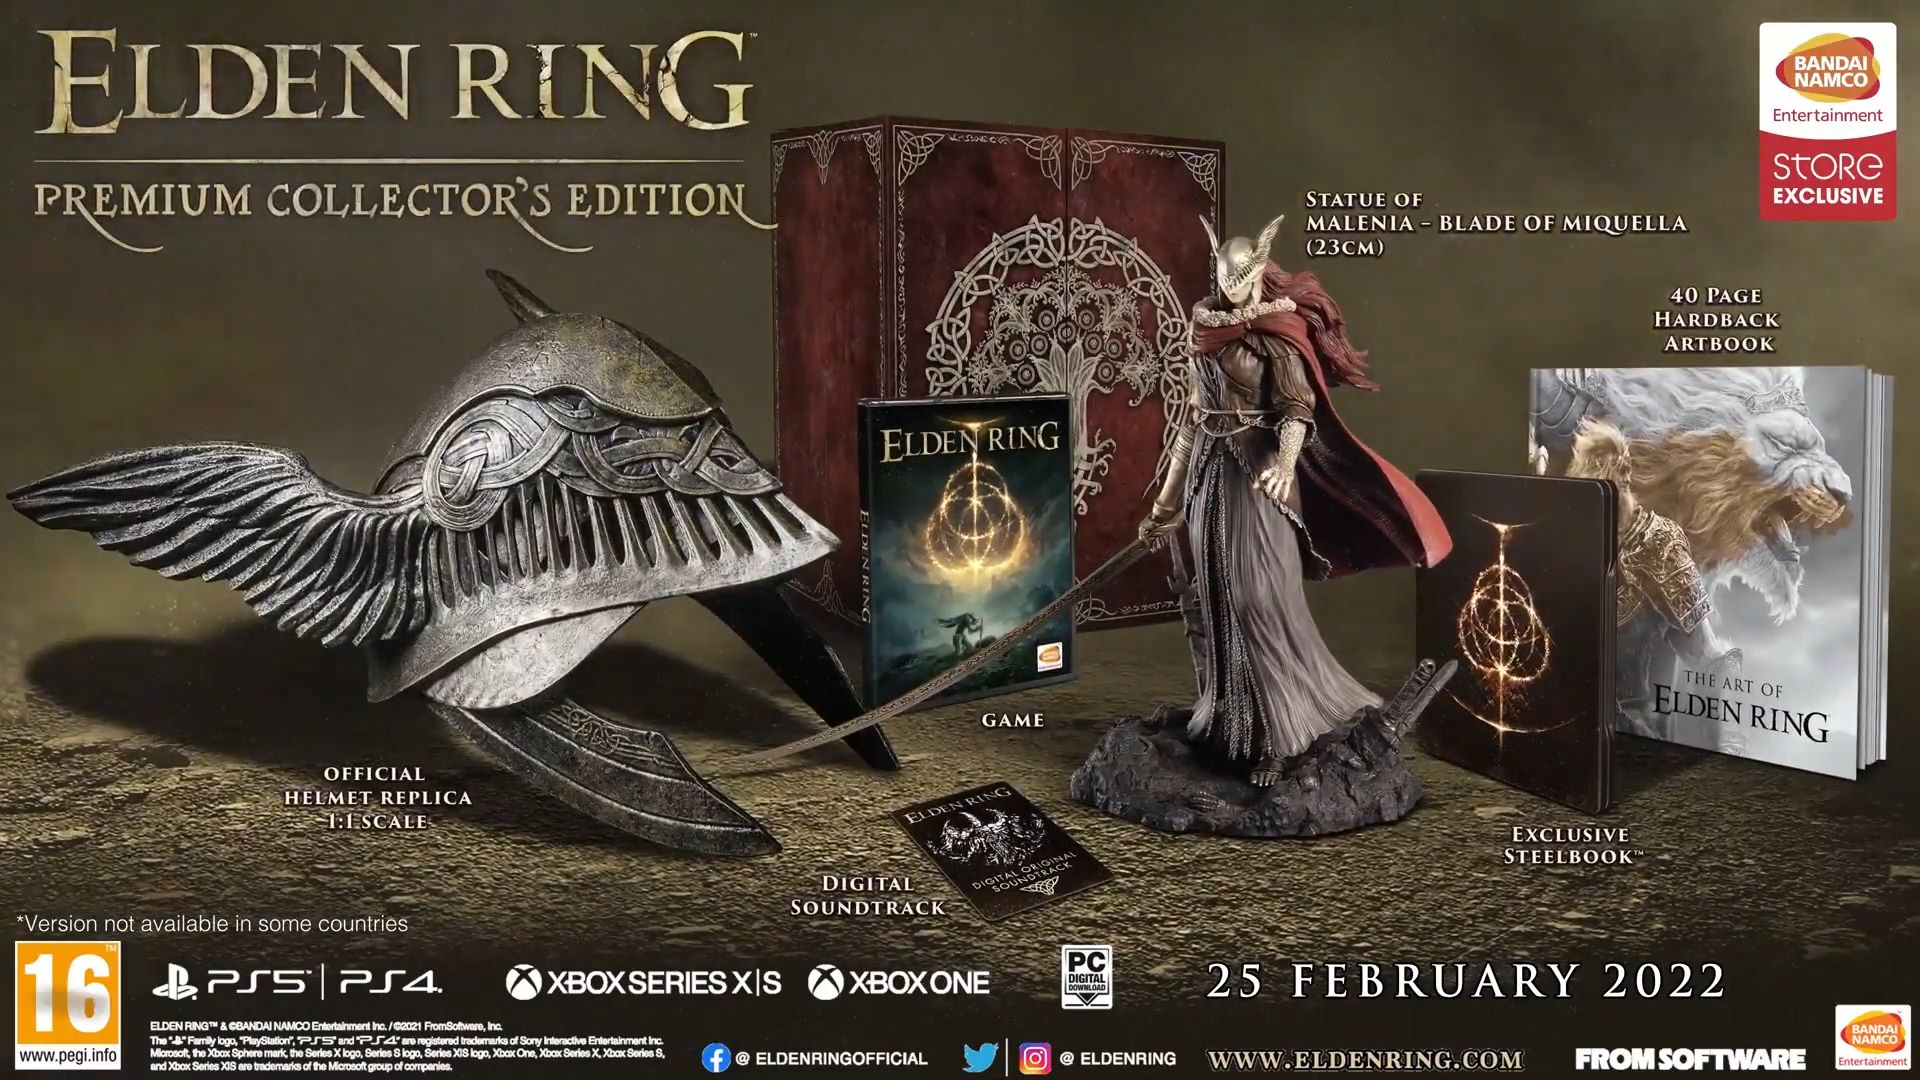 Elden Ring premium collector's edition comes with an astonishing 11